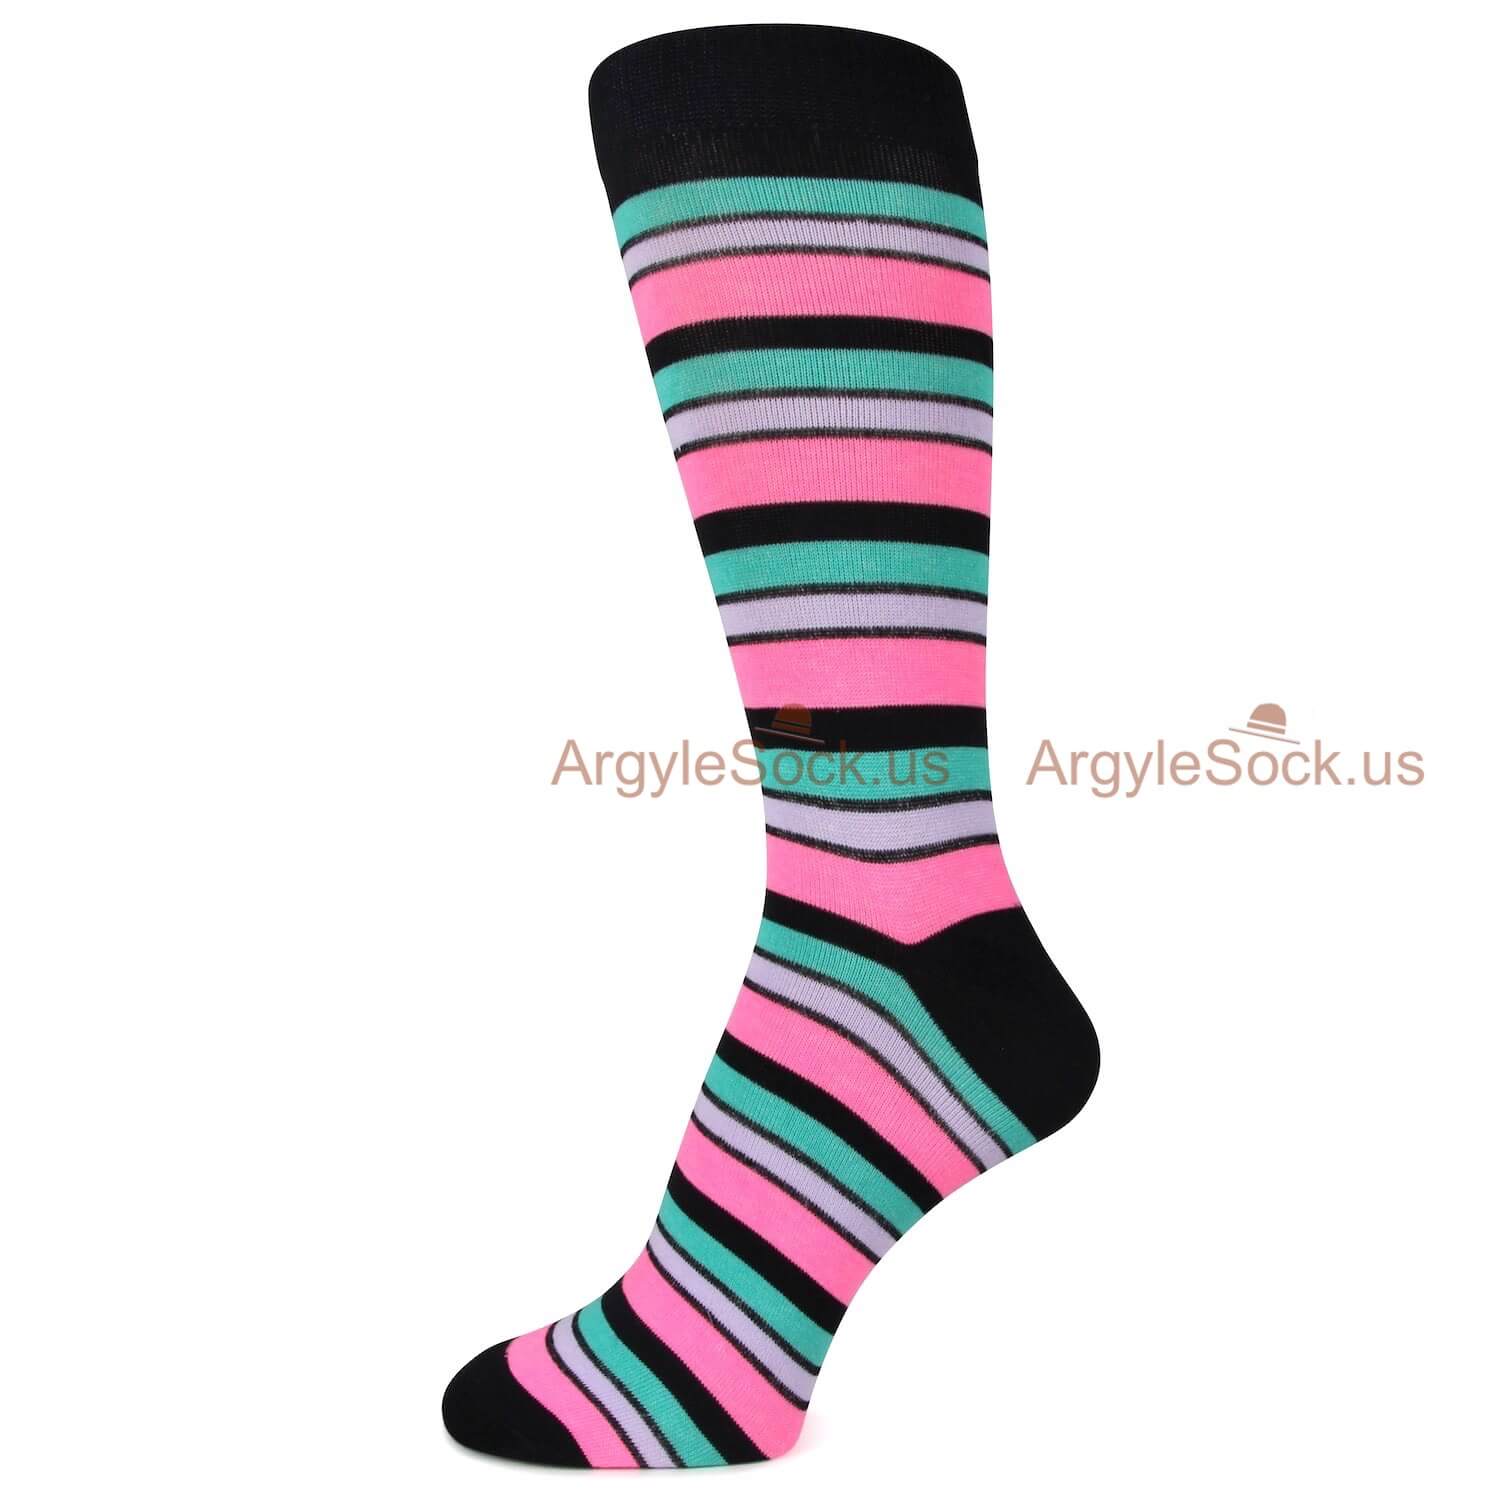 Black with Green Pink and Grey Lines Socks for Men